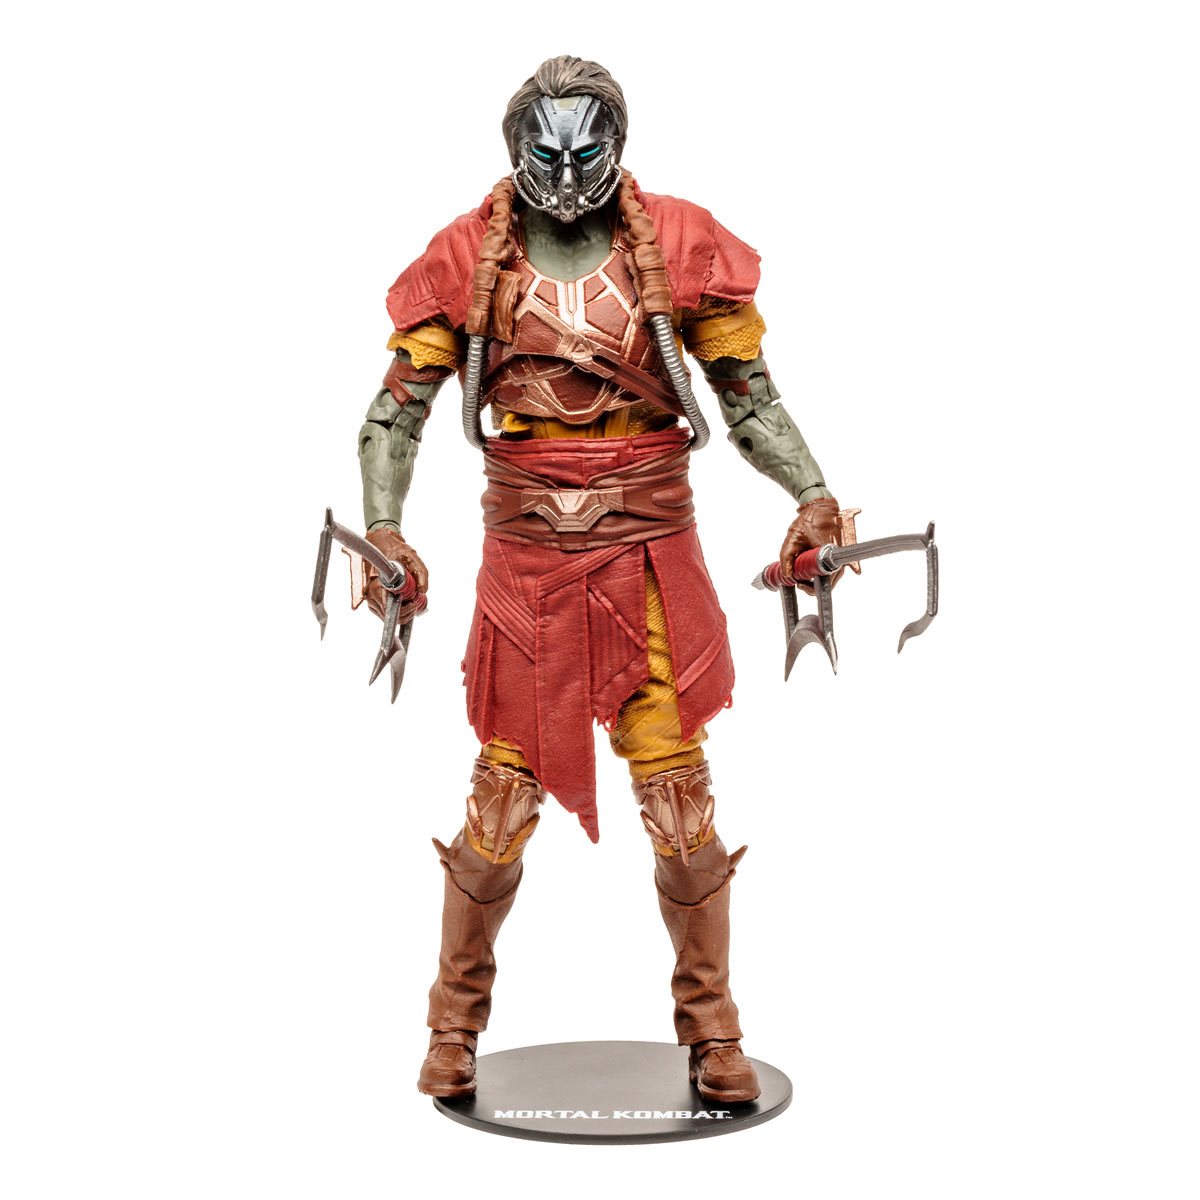 Mortal Kombat - Kabal Rapid Red 7-Inch Scale Action Figure